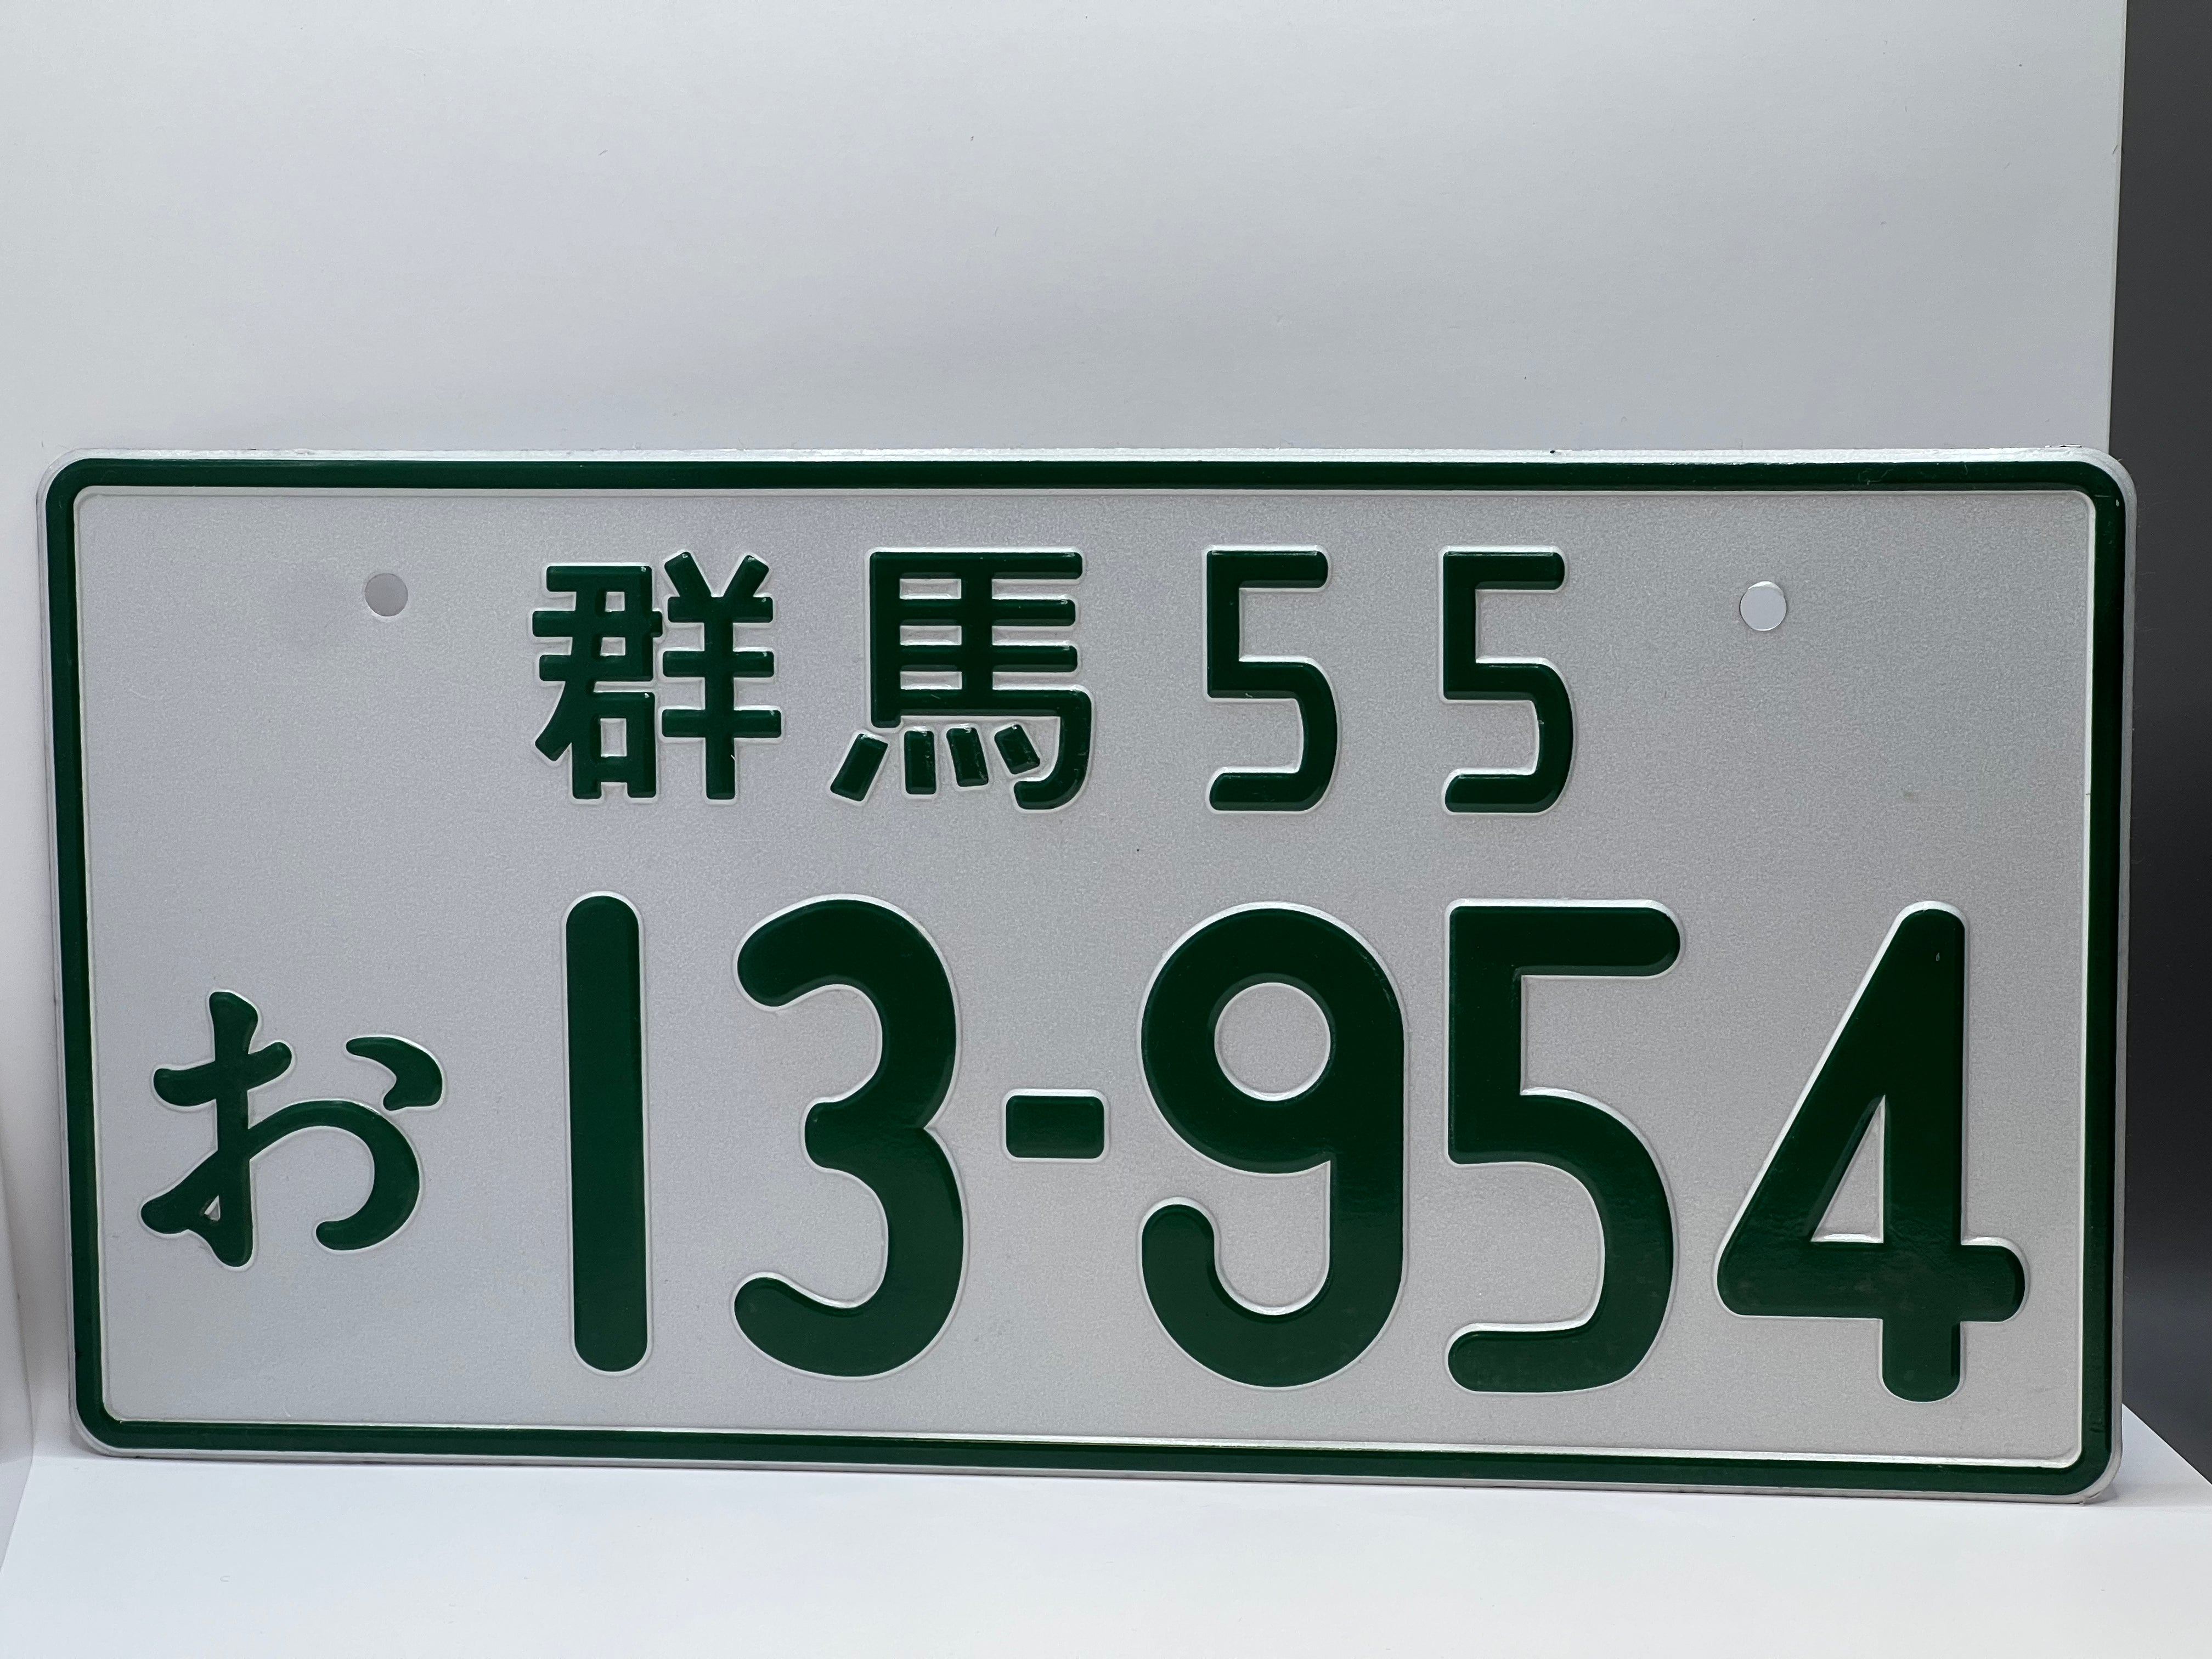 Takumi's license plate 13-954 from Initial D-High quality metal plate for fans